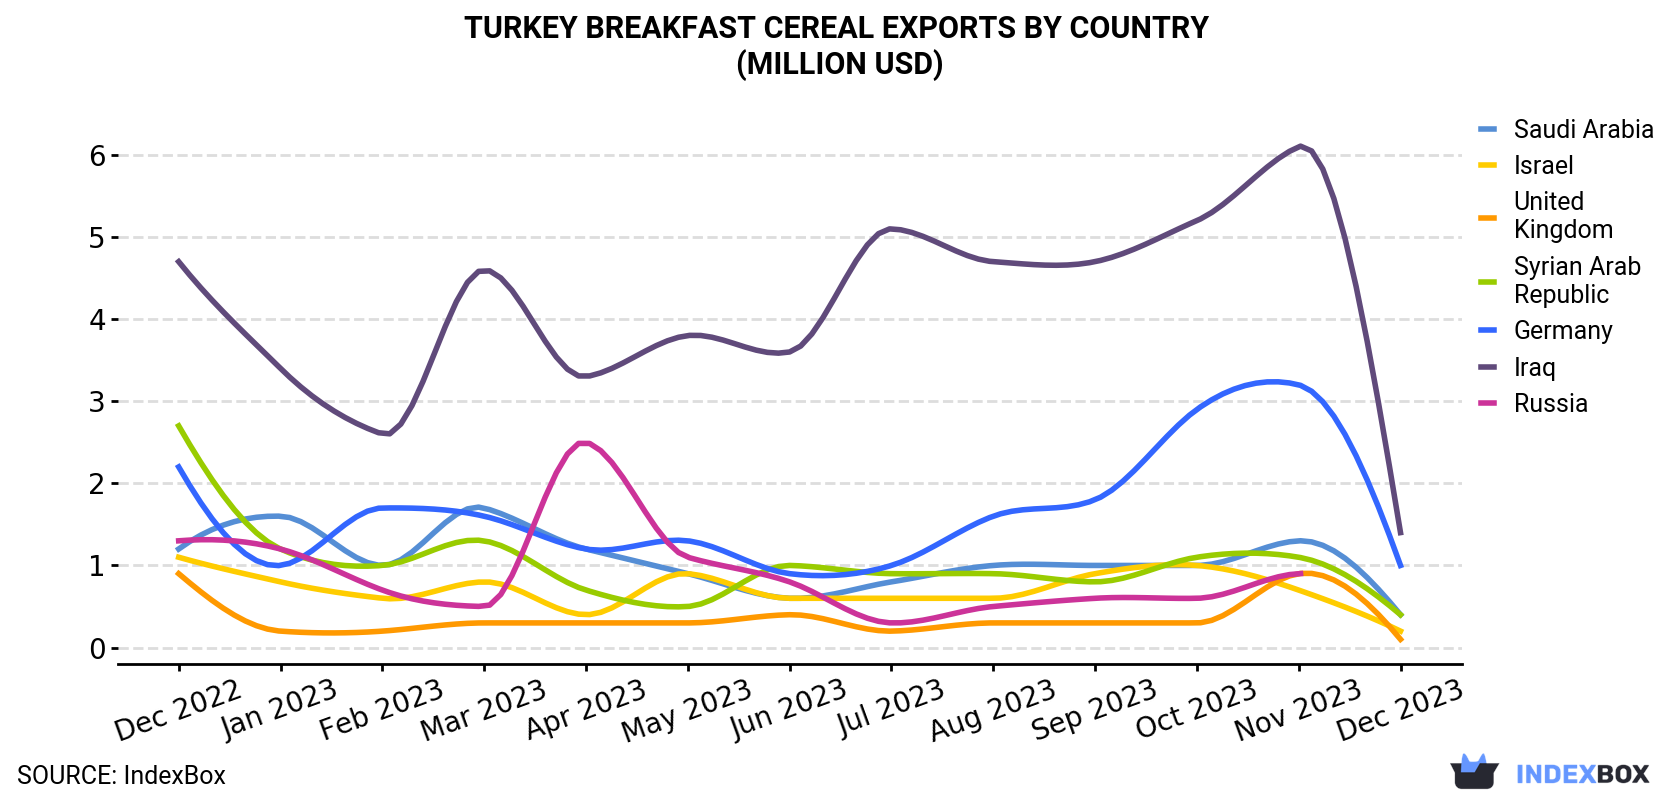 Turkey Breakfast Cereal Exports By Country (Million USD)